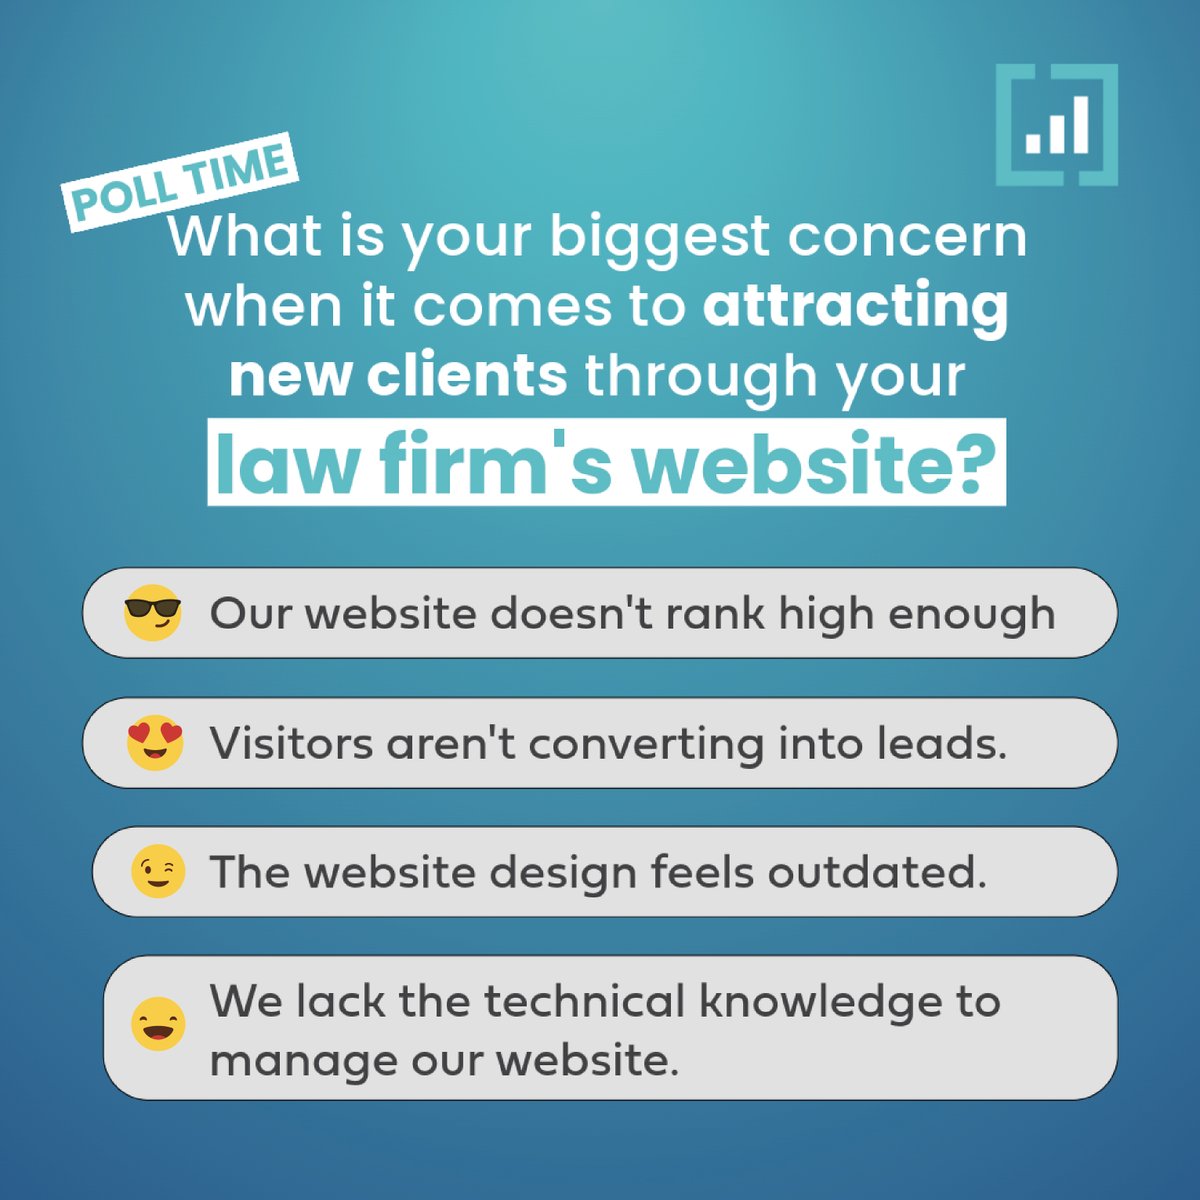 Is your law firm website attracting the right clients? 🤔

📈Drop a comment with the emoji to vote on your biggest concern, and we'll share tips to get you back on track.

#Webdesign #SEO #LegalMarketing